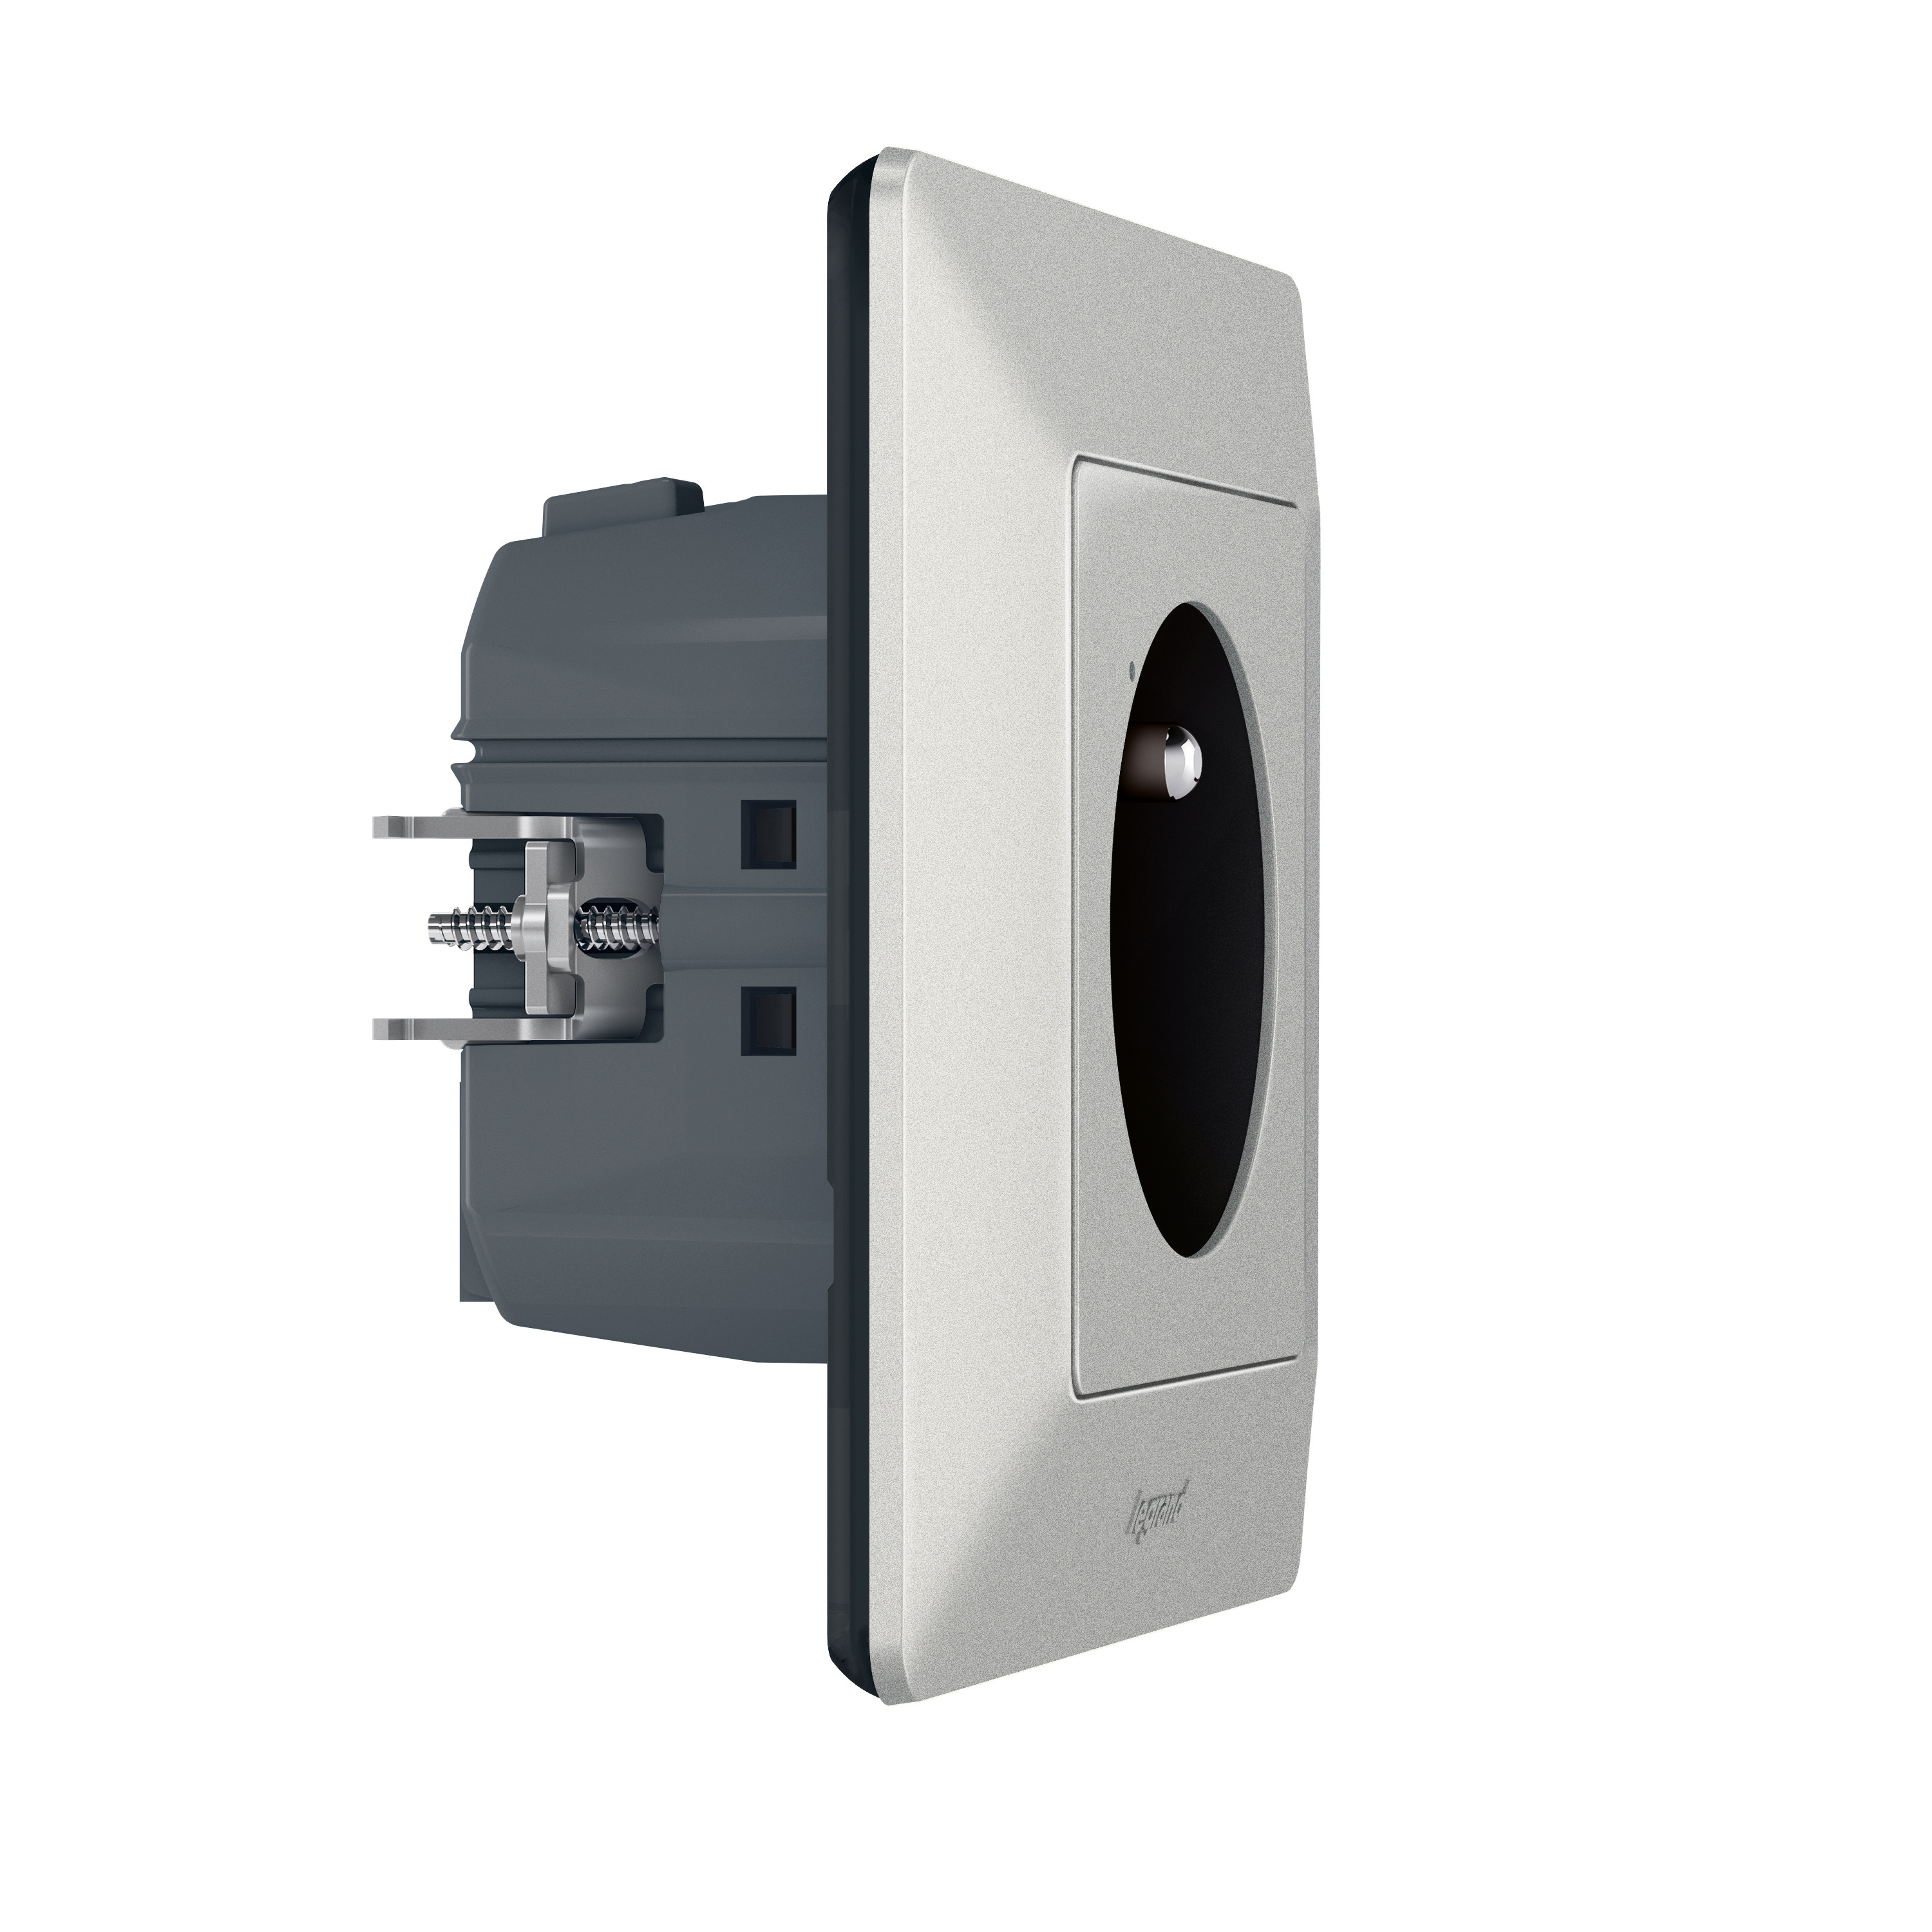 Connected power outlet (French standard) Valena Life with Netatmo 